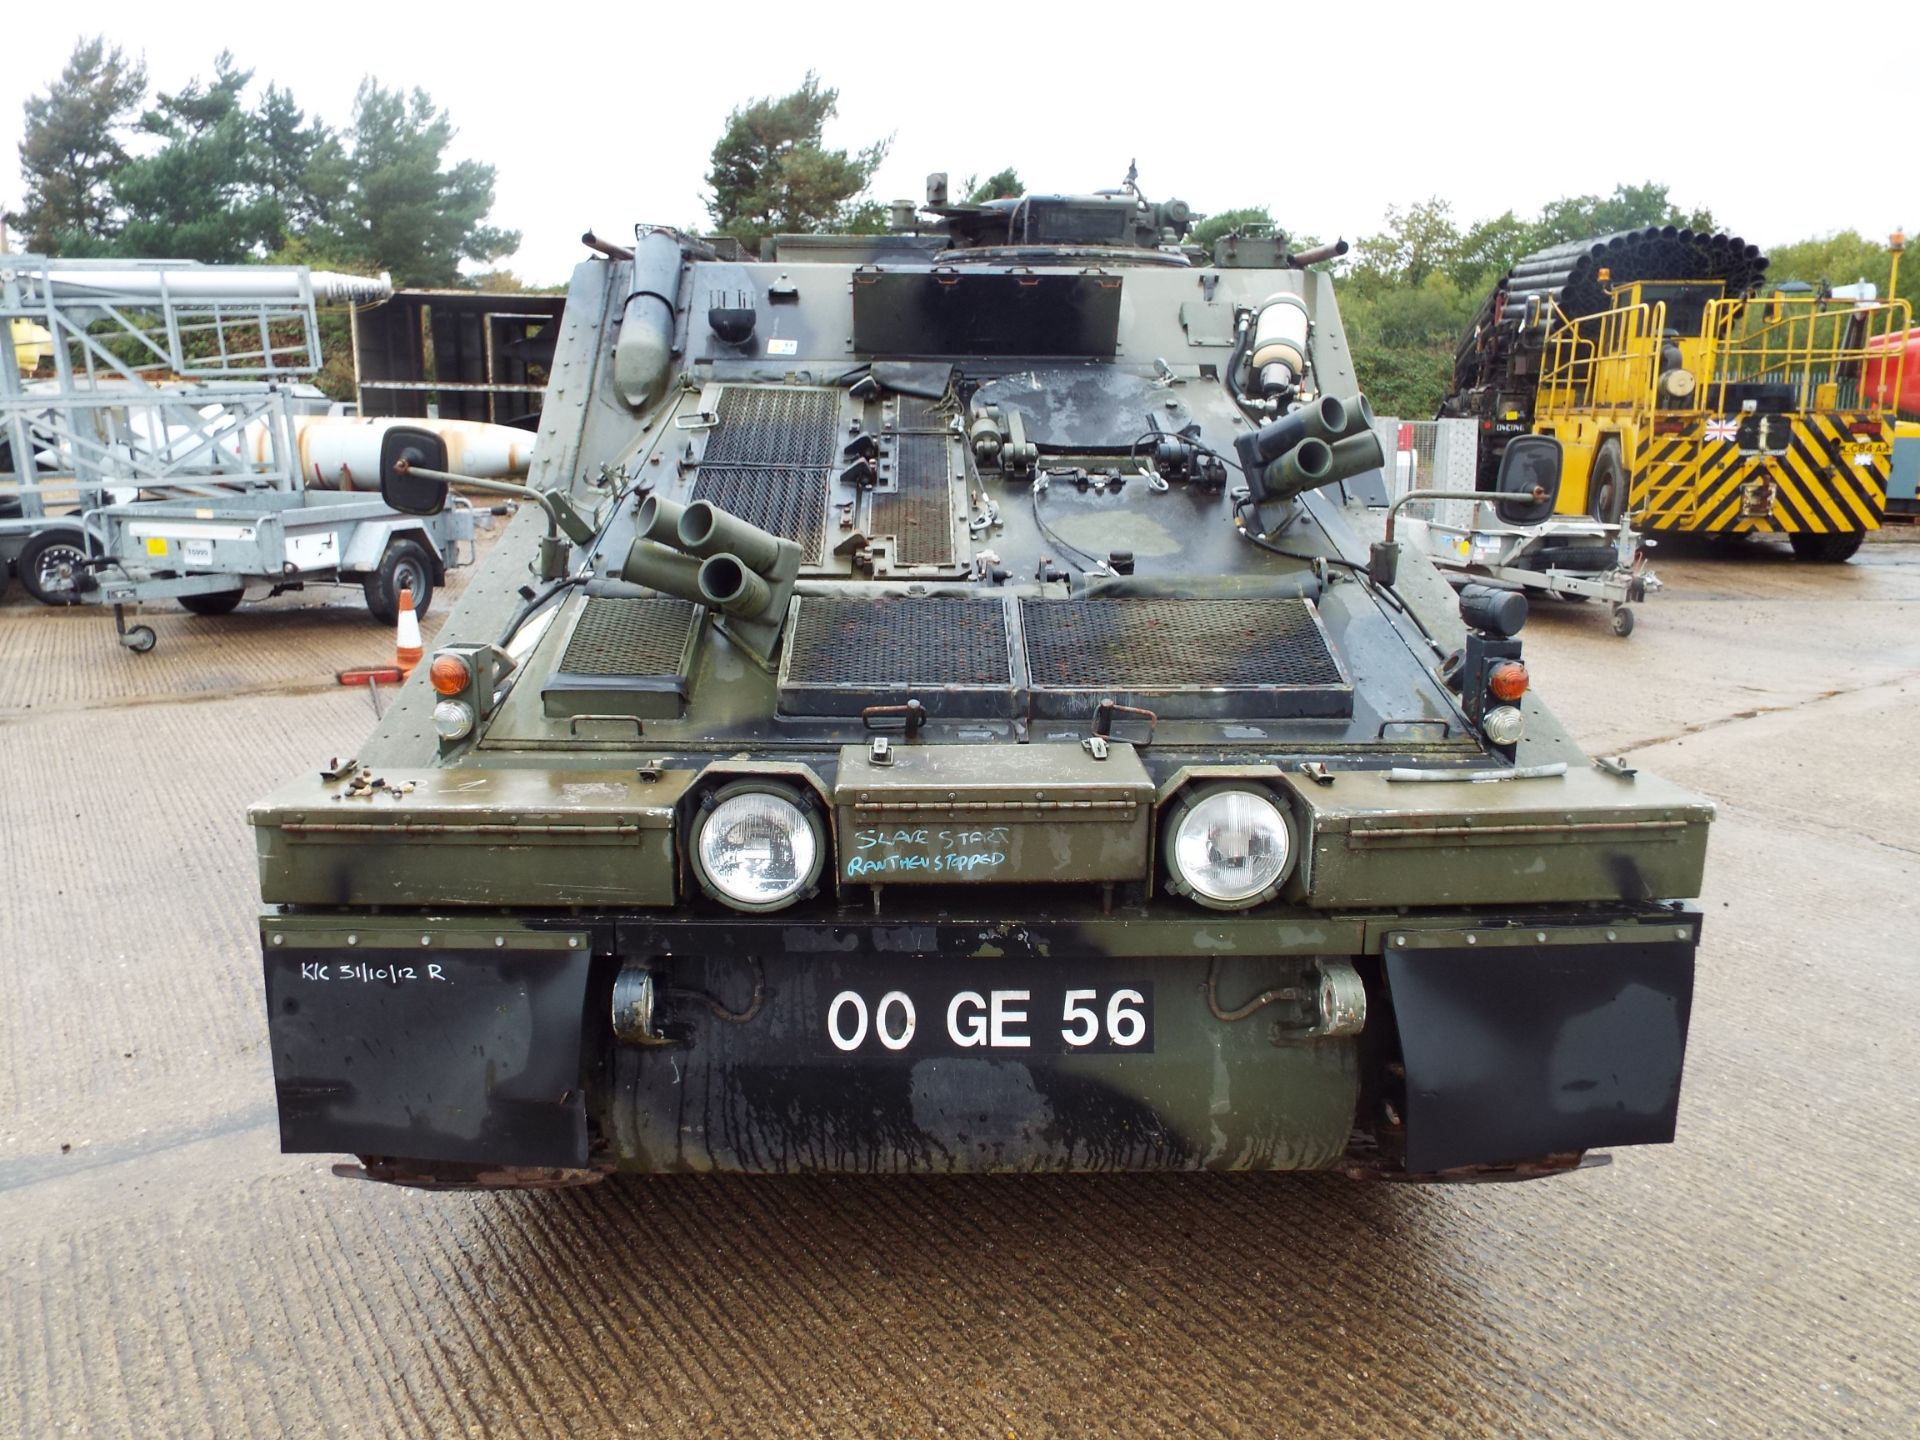 CVRT (Combat Vehicle Reconnaissance Tracked) FV105 Sultan Armoured Personnel Carrier - Image 2 of 31